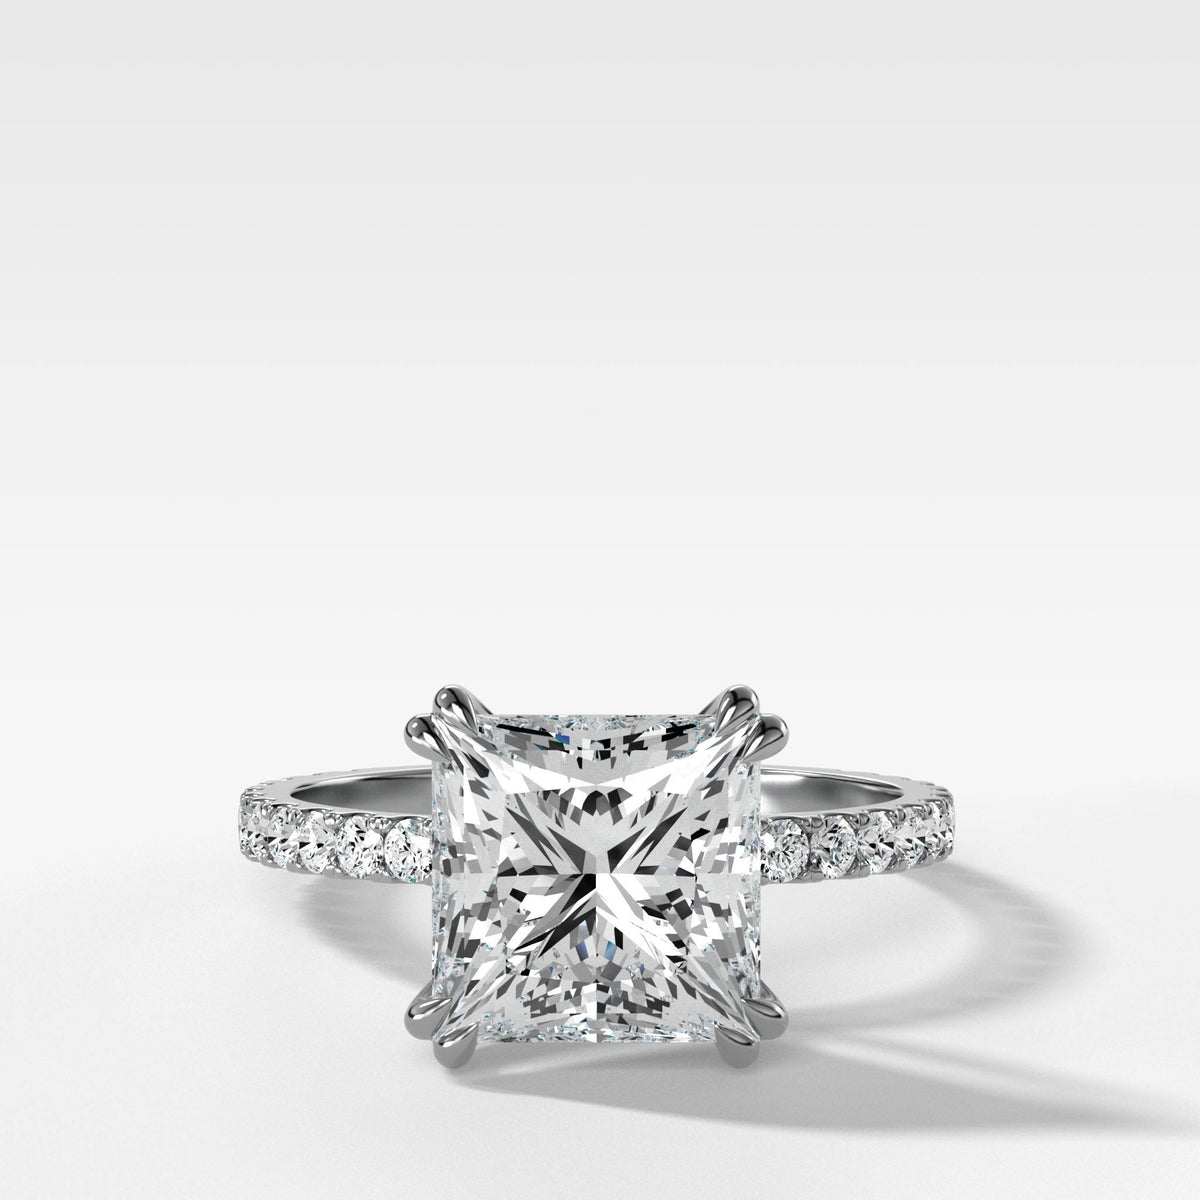 Signature Pave Engagement Ring With Princess Cut by Good Stone in White Gold